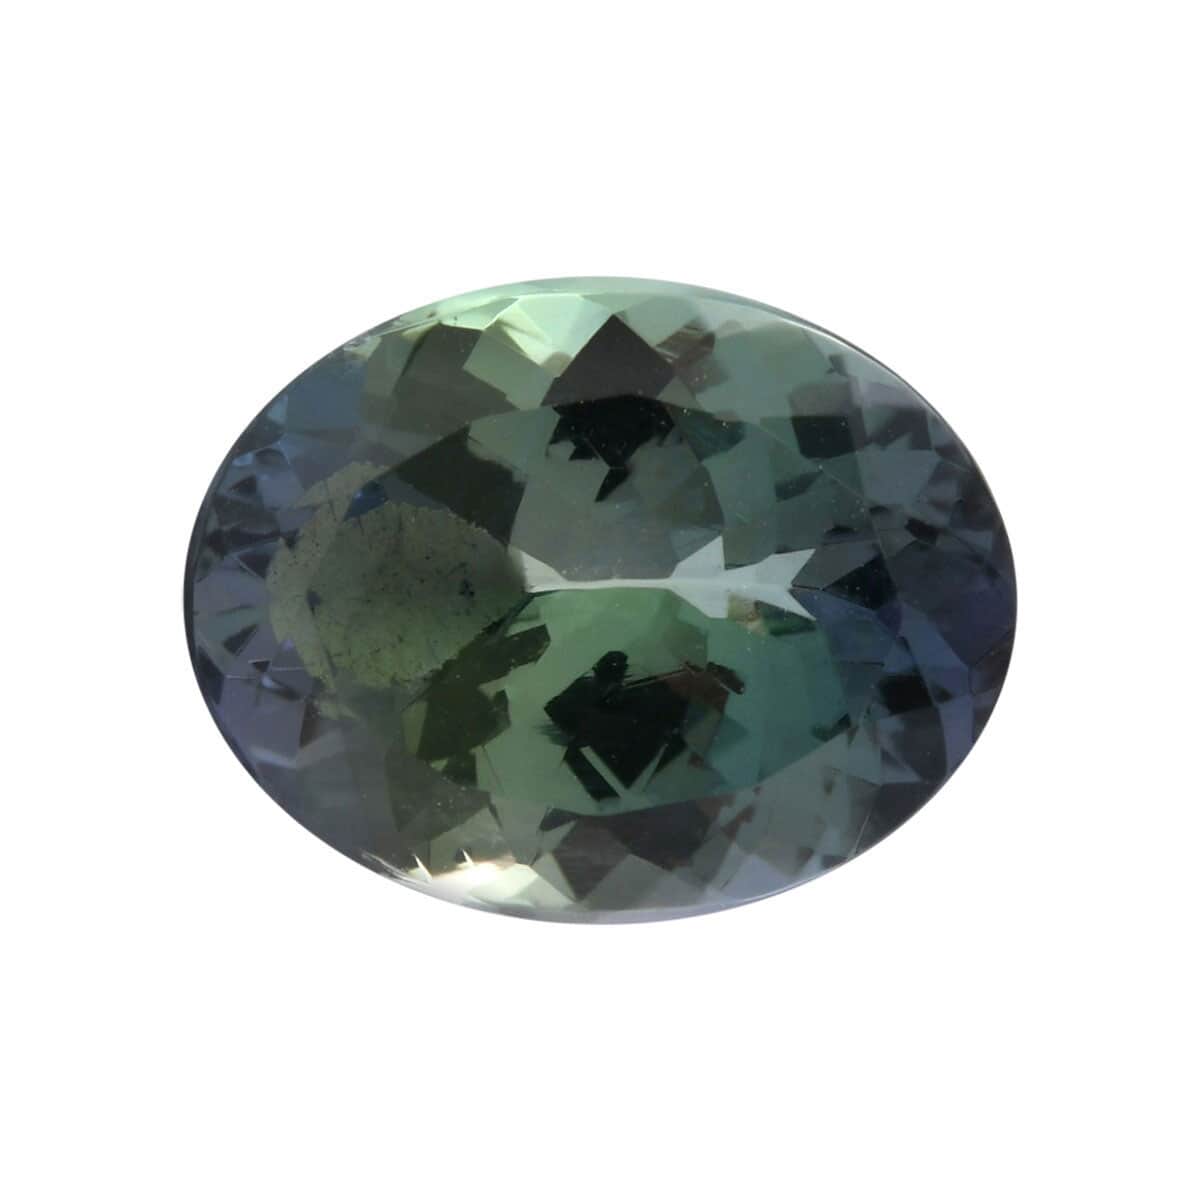 Certified AAAA Green Tanzanite Faceted (Oval 11.95x9.3 mm) 5.08 ctw, Loose Gem , Loose Gemstones , Loose Stones , Jewelry Stones image number 0